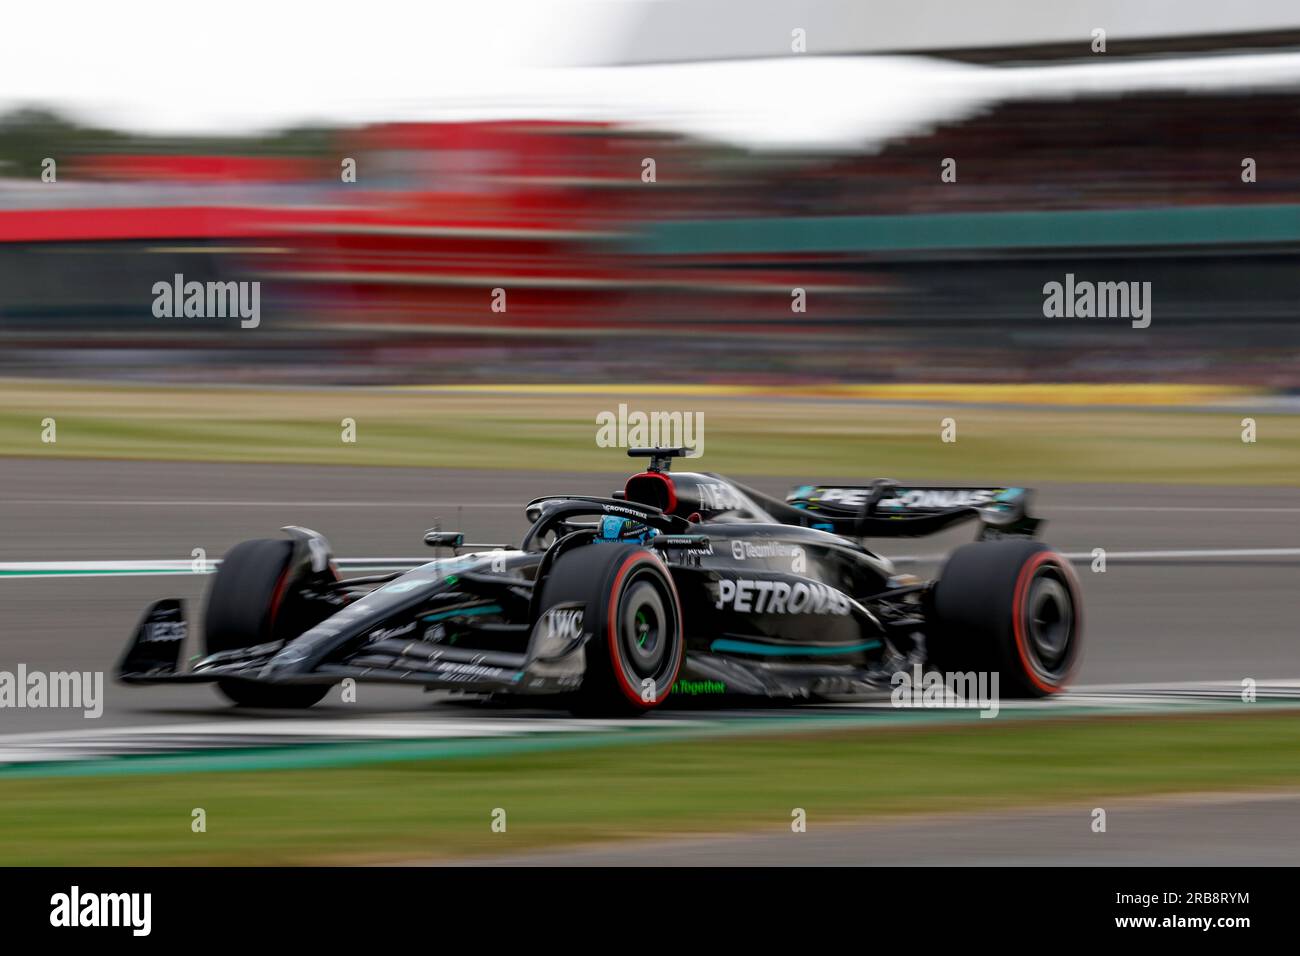 #63 George Russell (GBR, Mercedes-AMG Petronas F1 Team), F1 Grand Prix of Great Britain at Silverstone Circuit on July 8, 2023 in Silverstone, Great Britain. (Photo by HIGH TWO) Stock Photo